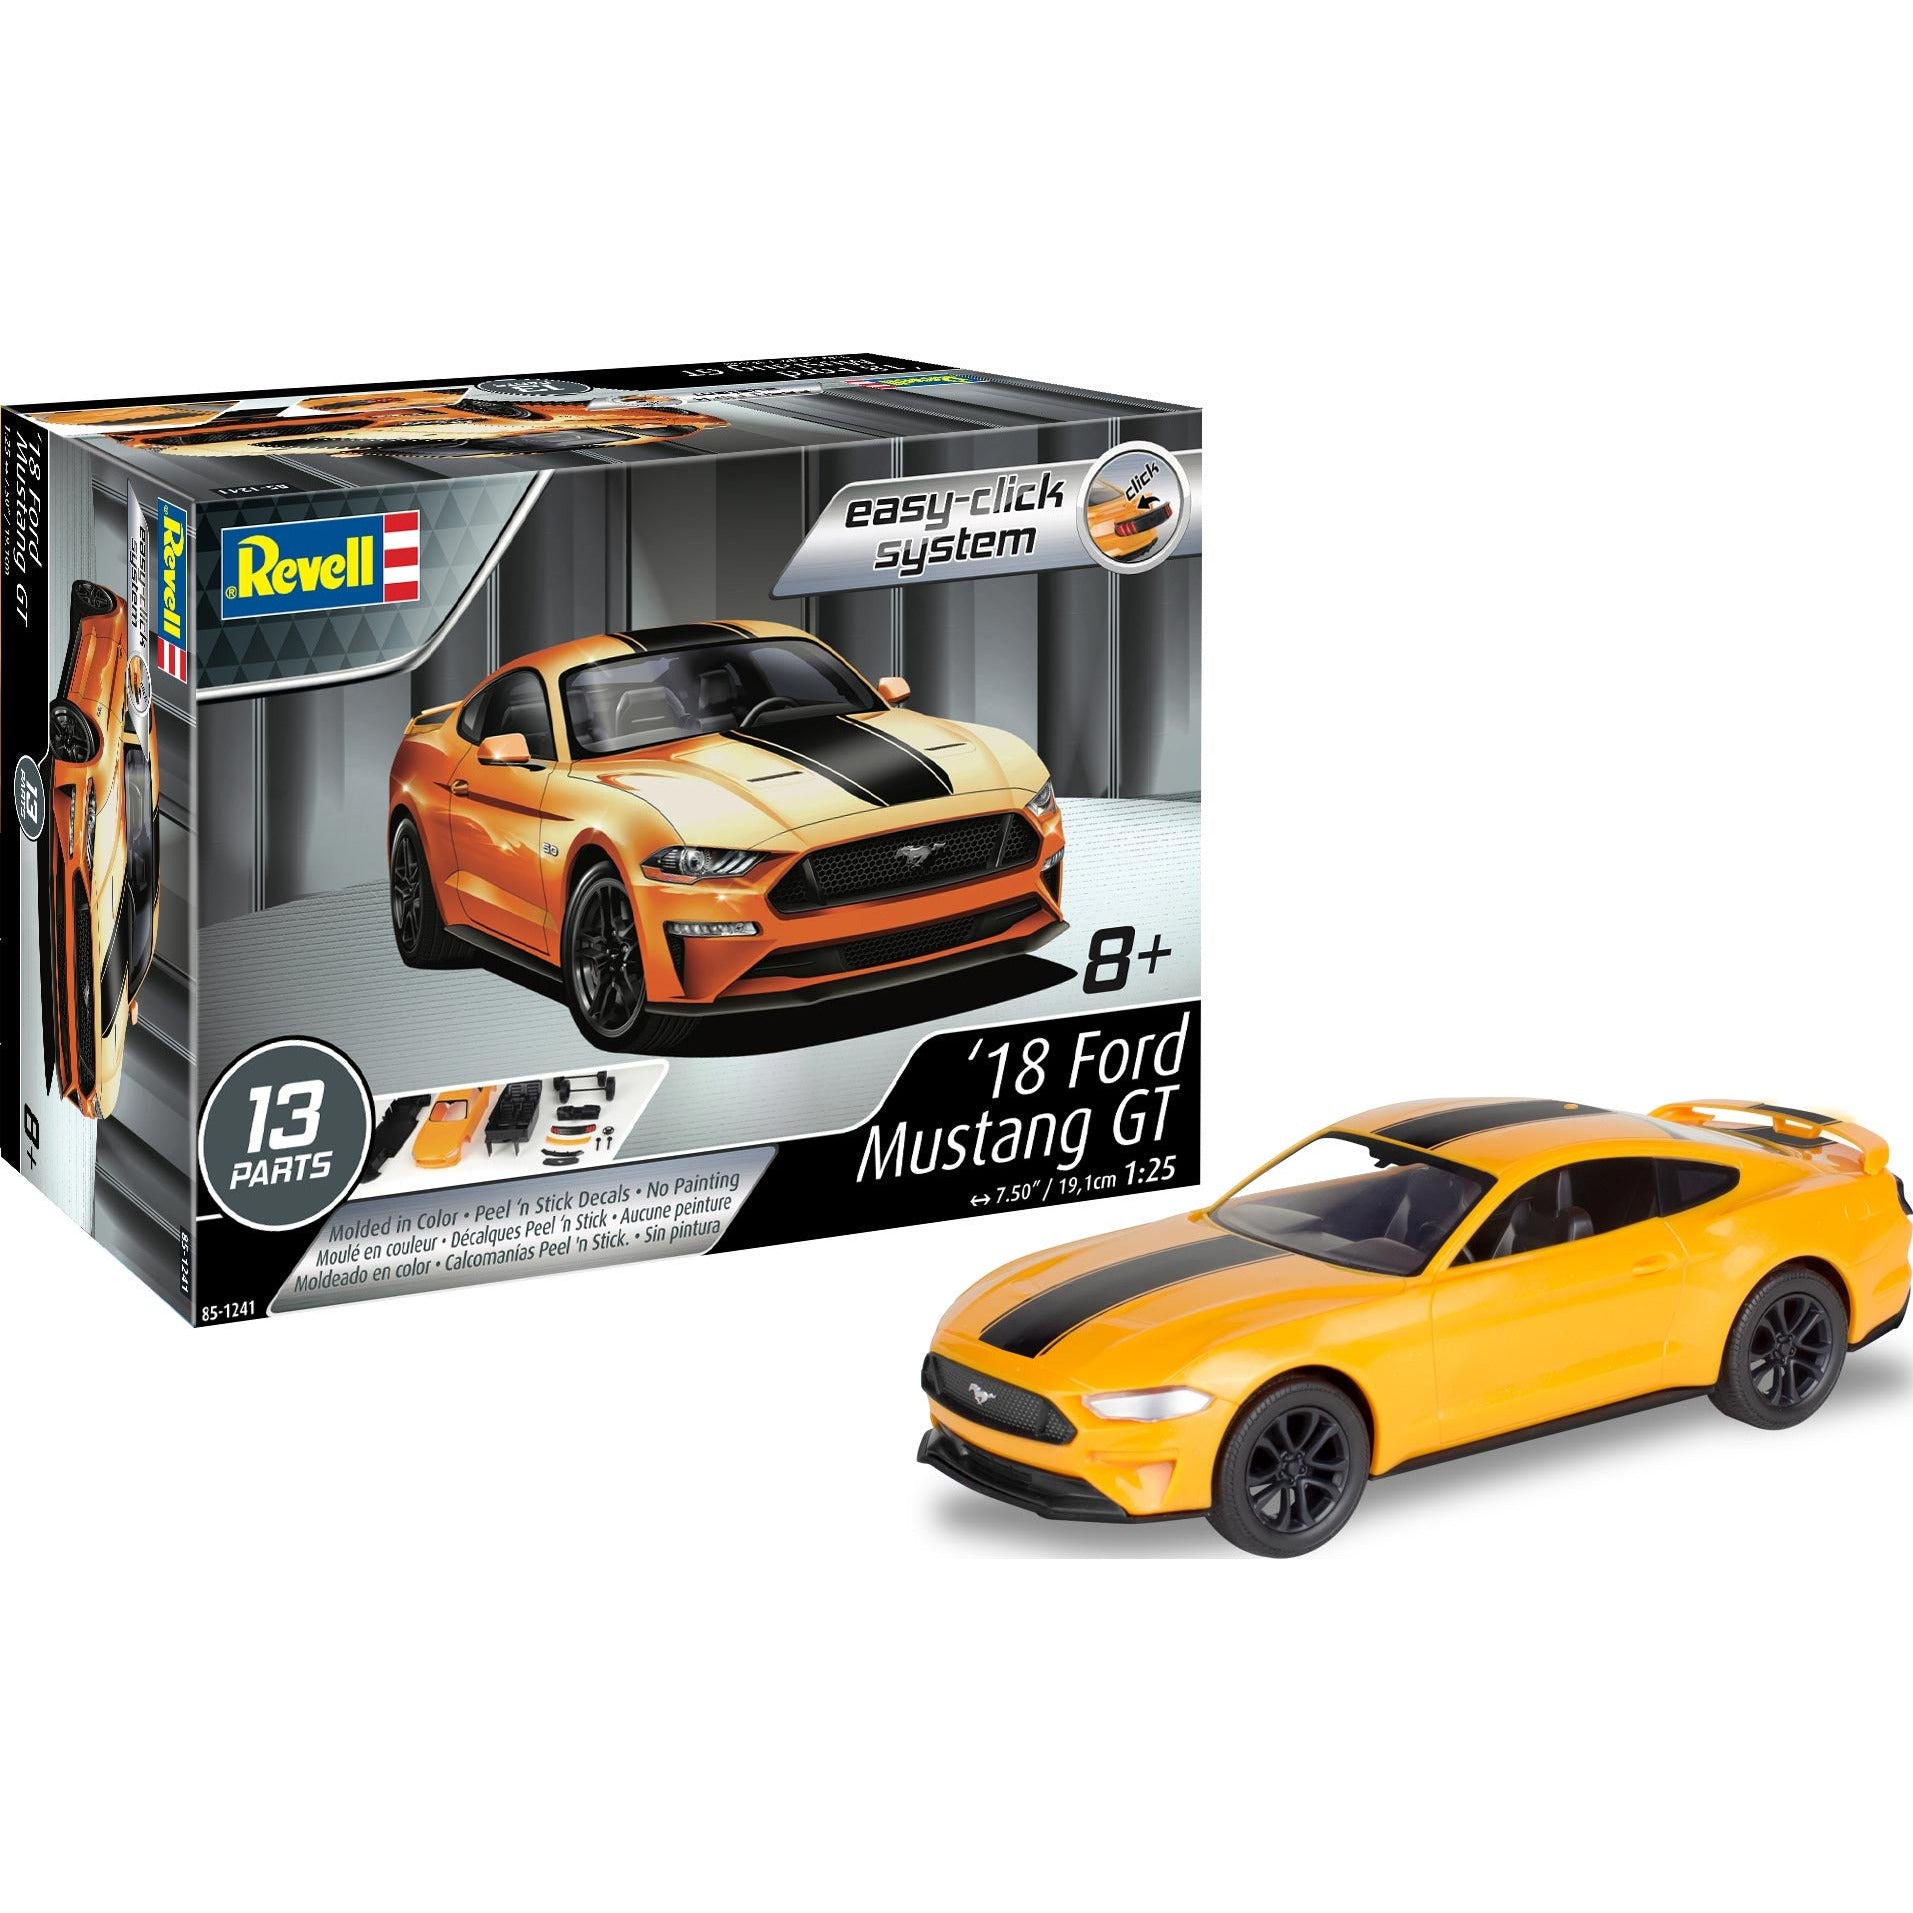 2018 Ford Mustang GT Easy Click 1/25 #1241 by Revell